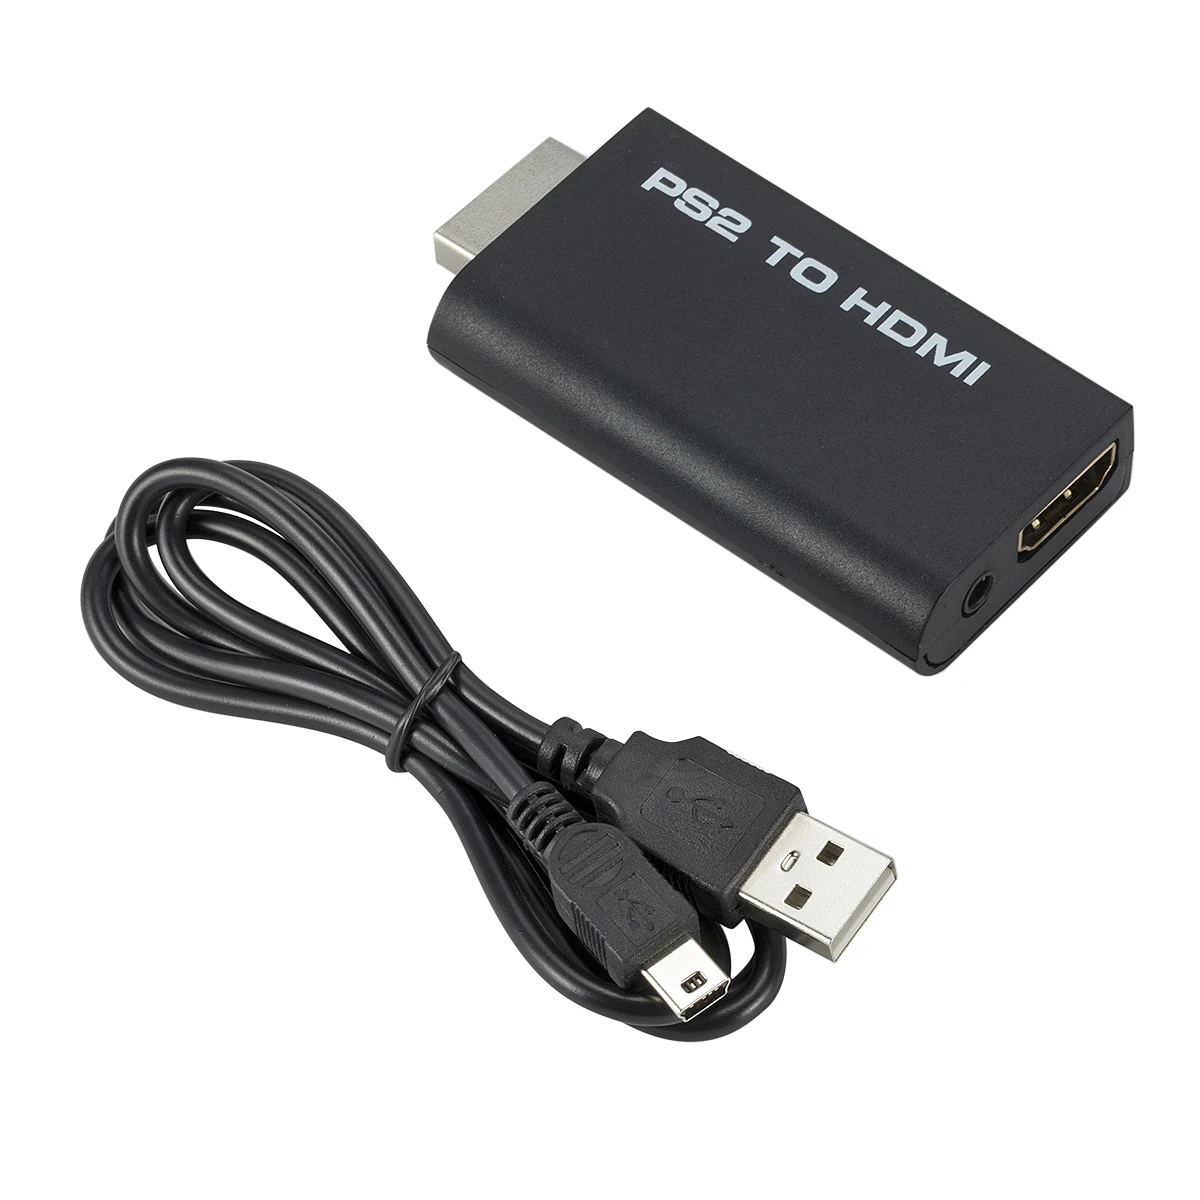 PS2 hdmi converter PS2 to HDMI Adapter for Sony PlayStation 2, View PS2 hdmi converter, Product Details from Shenzhen Rui Xin Industrial on Alibaba.com